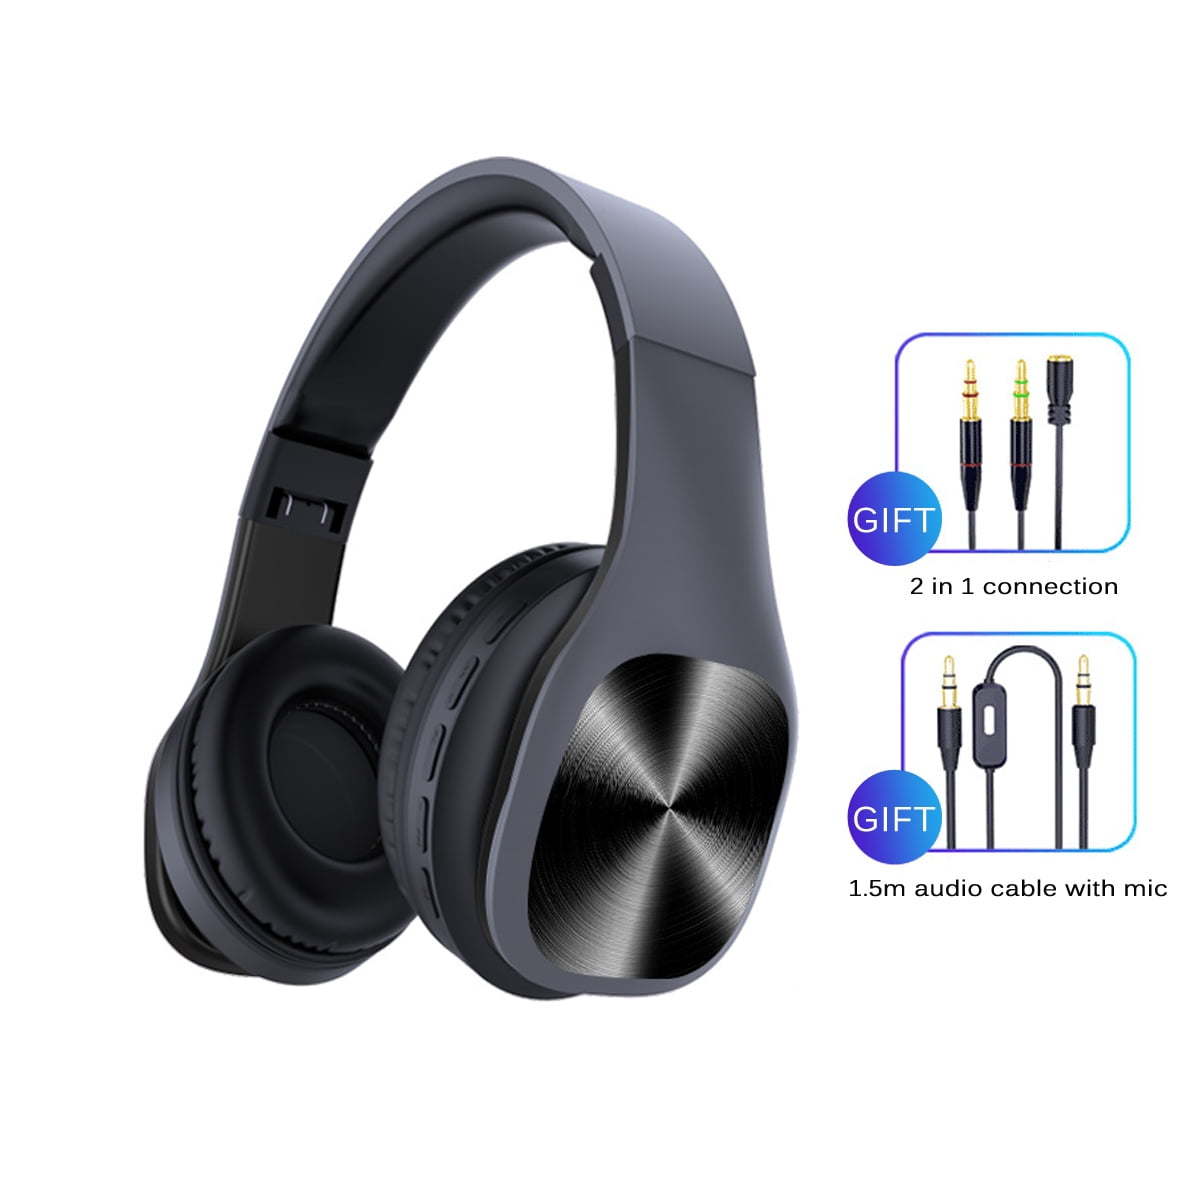 Active Noise Cancelling Headphones with Mic, Wireless, Wired 2-in-1, Comfortable & Stereo Over Ear Headset, Fast Stream Low Latency, Ideal for PC & TV - Walmart.com